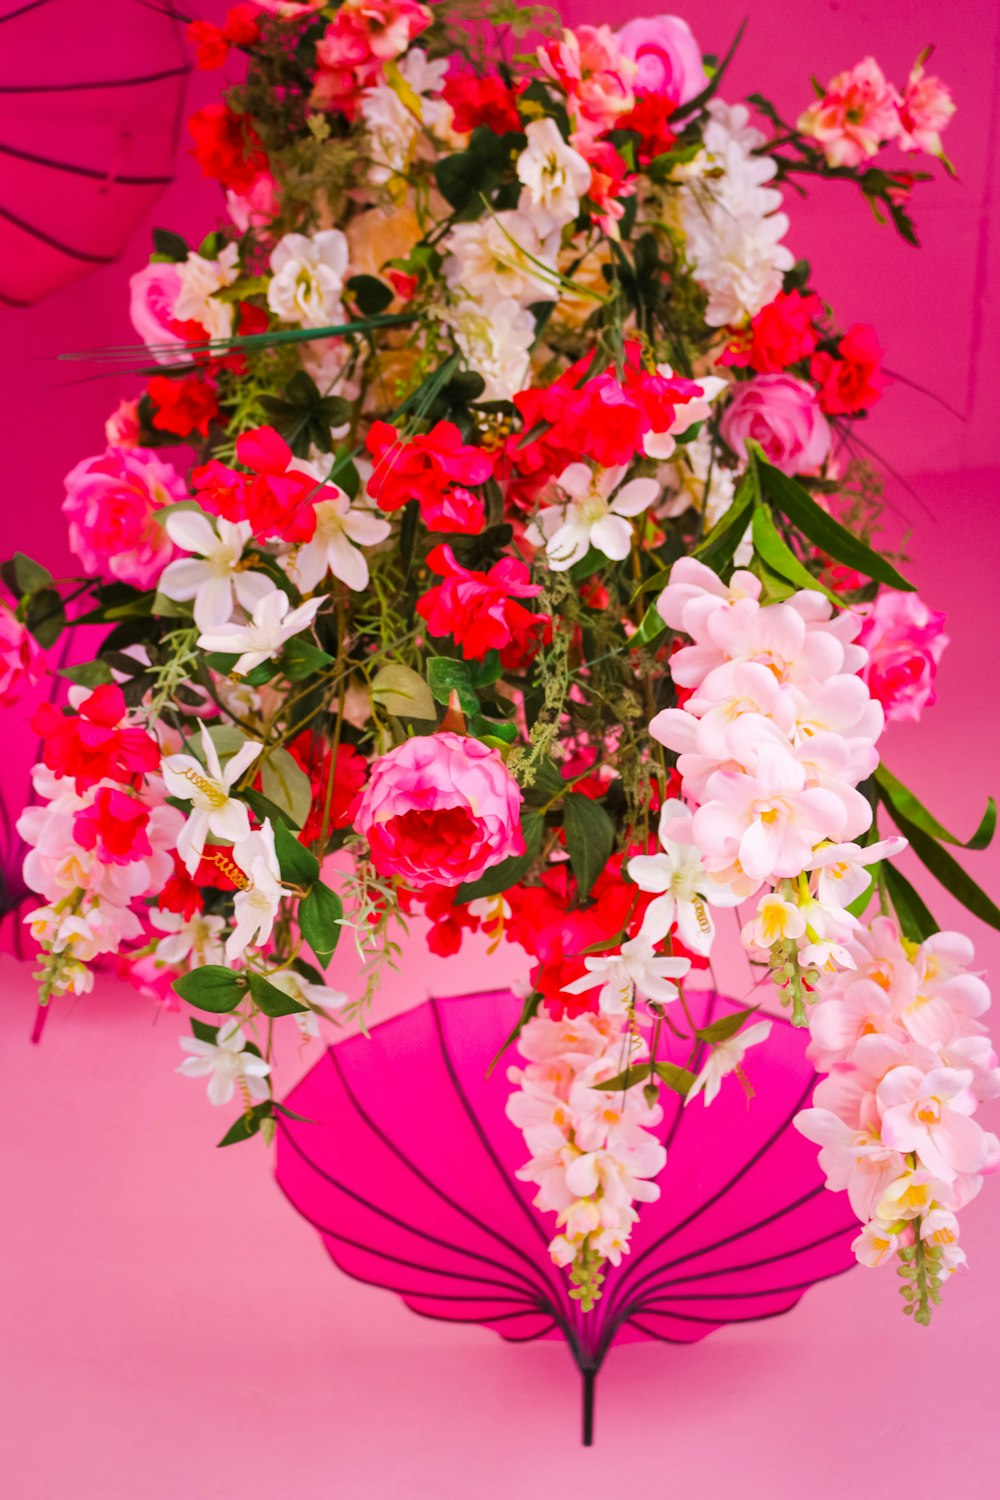 pink and white flowers on red table